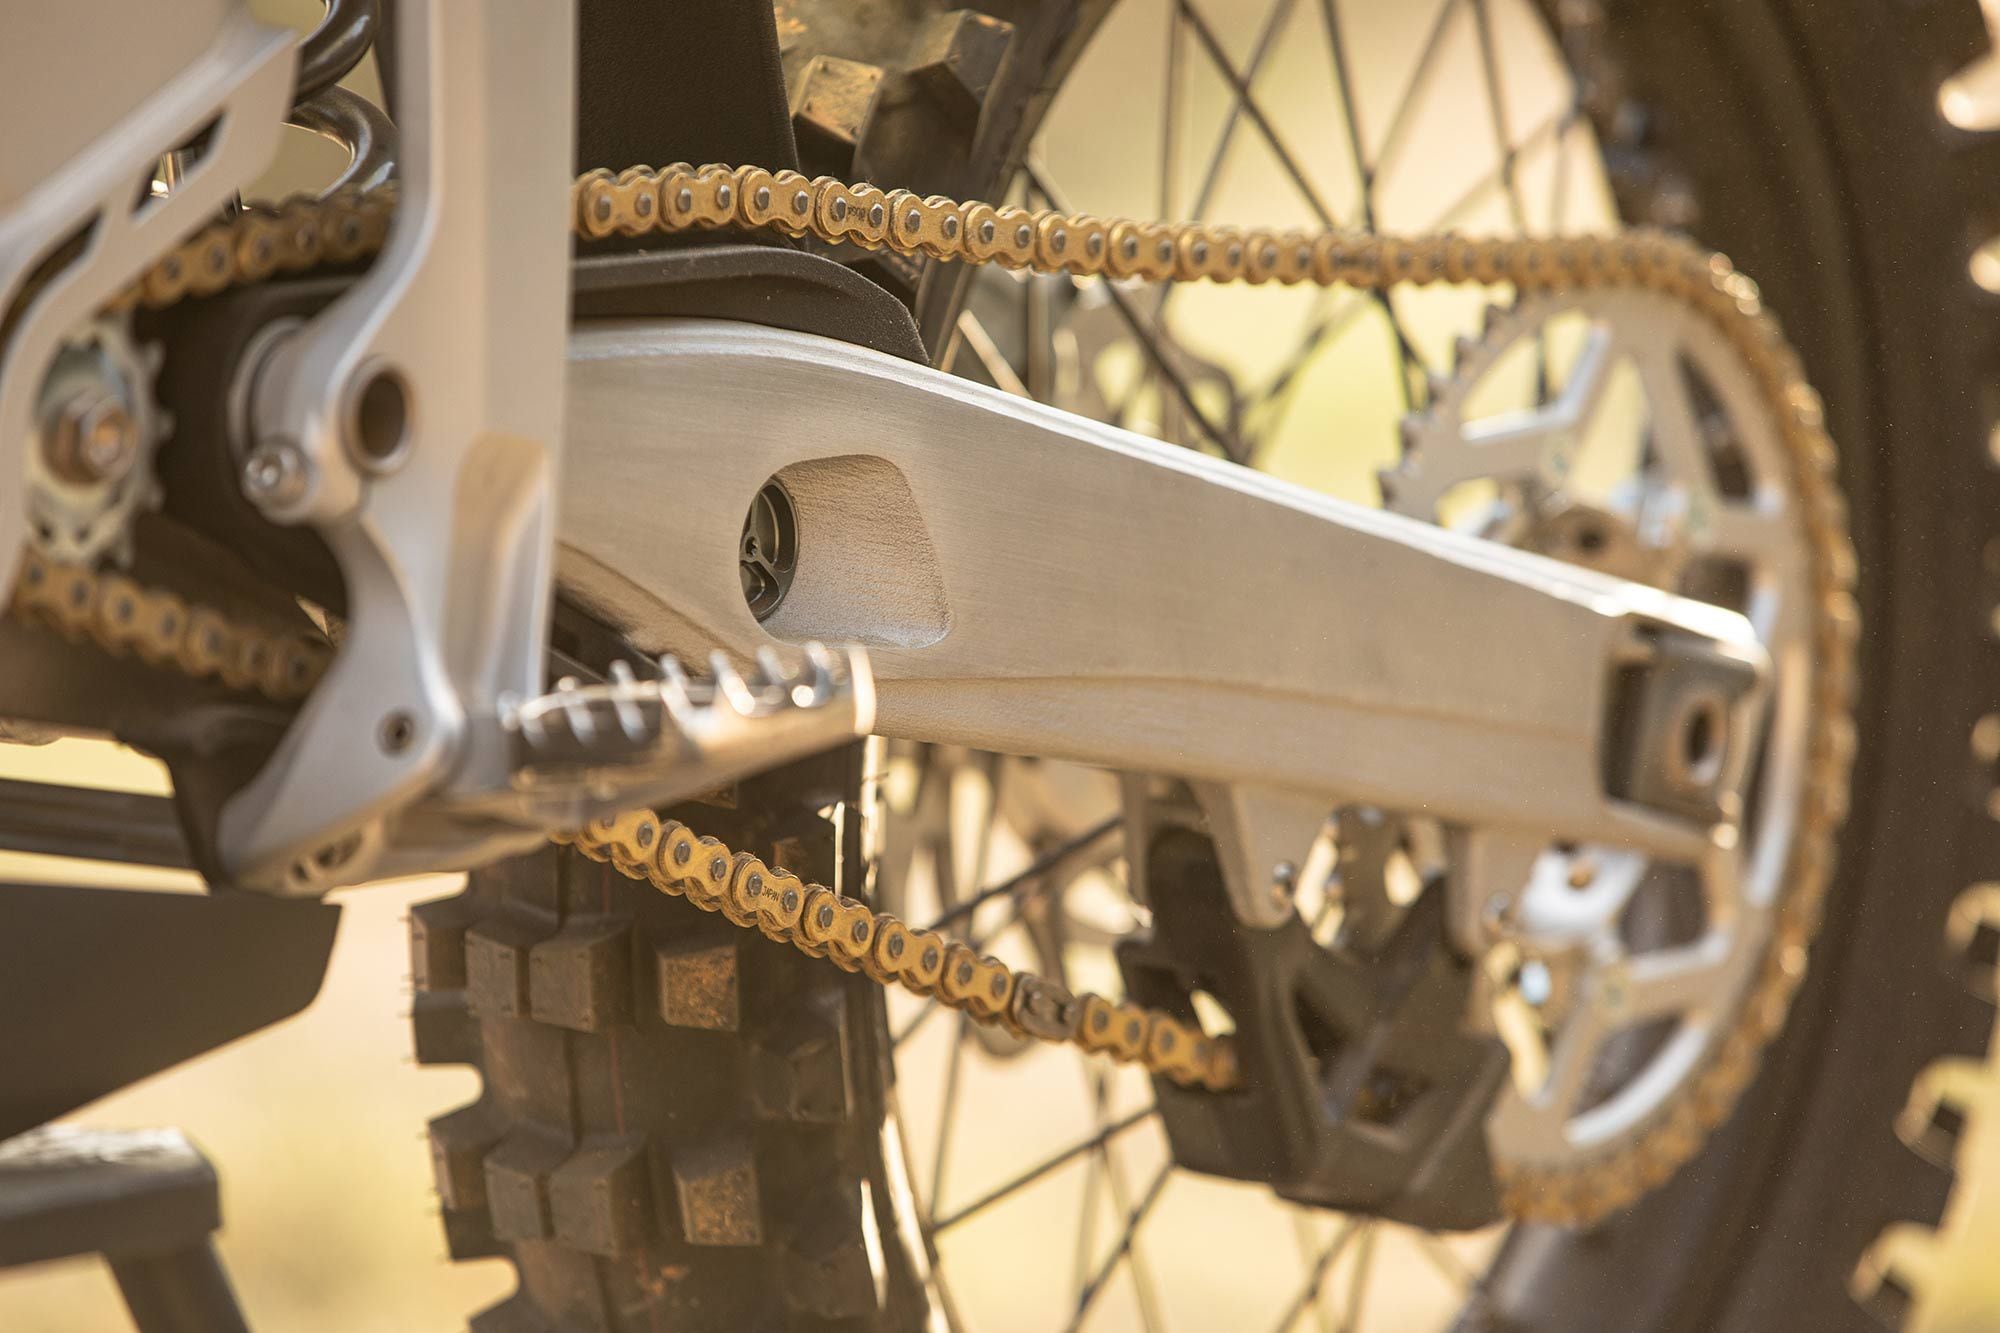 Captive adjustment axle slider blocks make for easier and accurate chain adjustment.